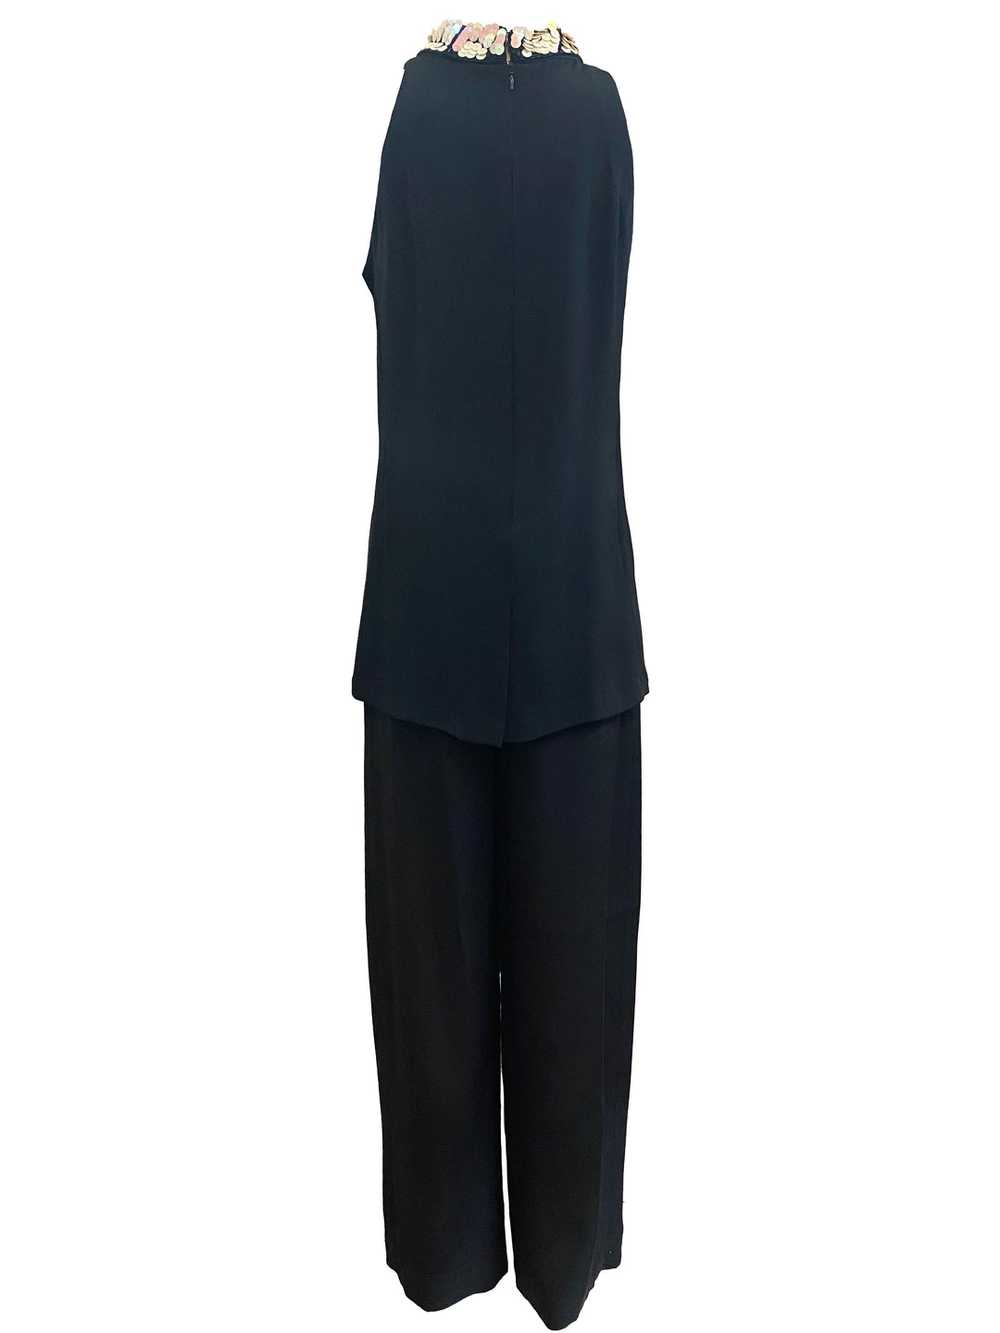 90s does Swinging 60s Black Satin Pantsuit with S… - image 3